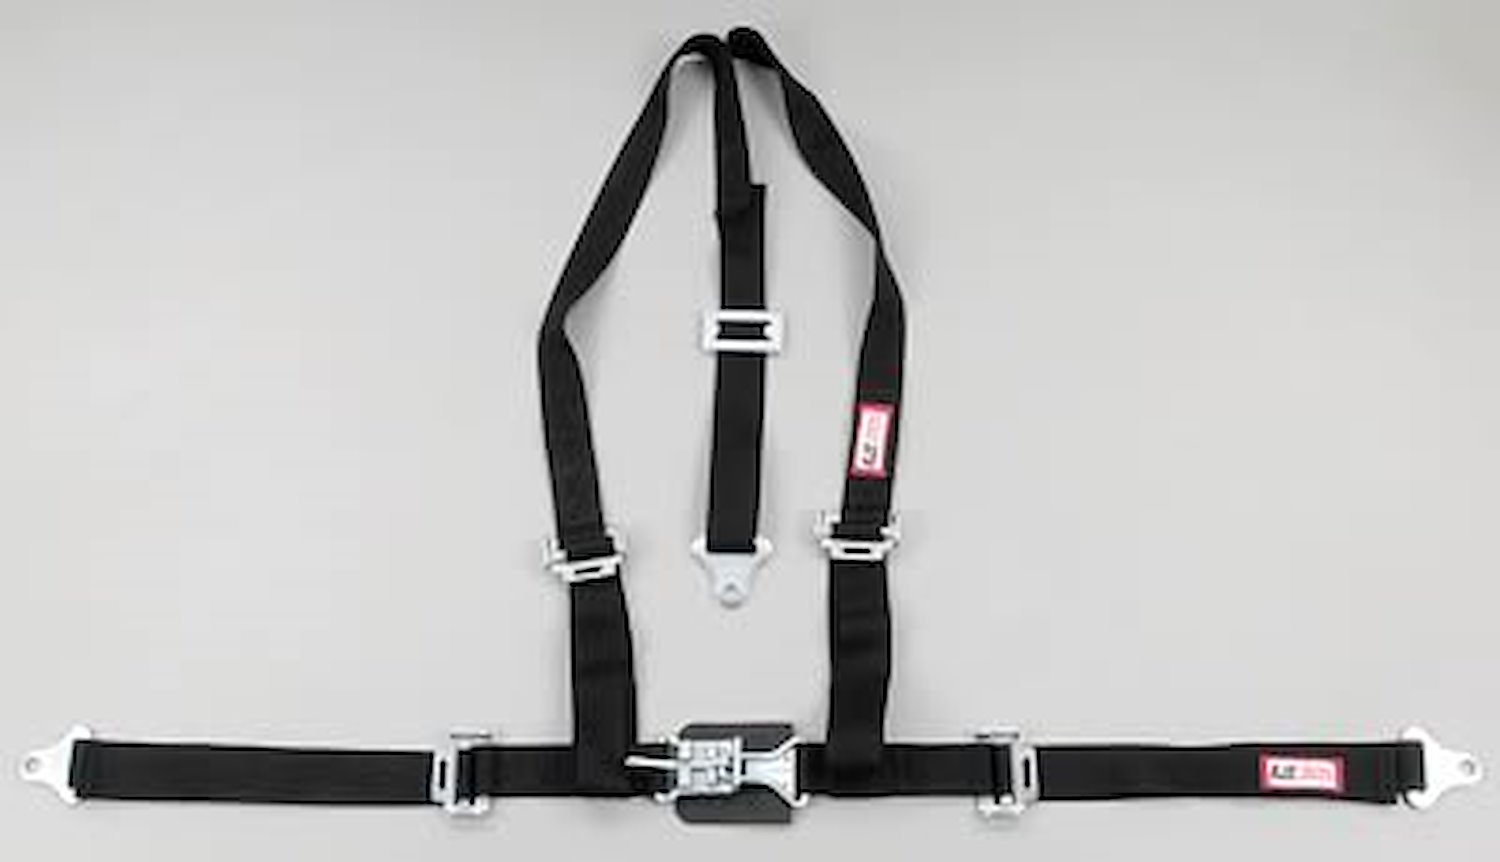 NON-SFI L&L HARNESS 2 PULL UP Lap Belt SNAP SEWN IN 2 S.H. Individual ROLL BAR Mount w/STERNUM STRAP WRAP/SNAP BLACK